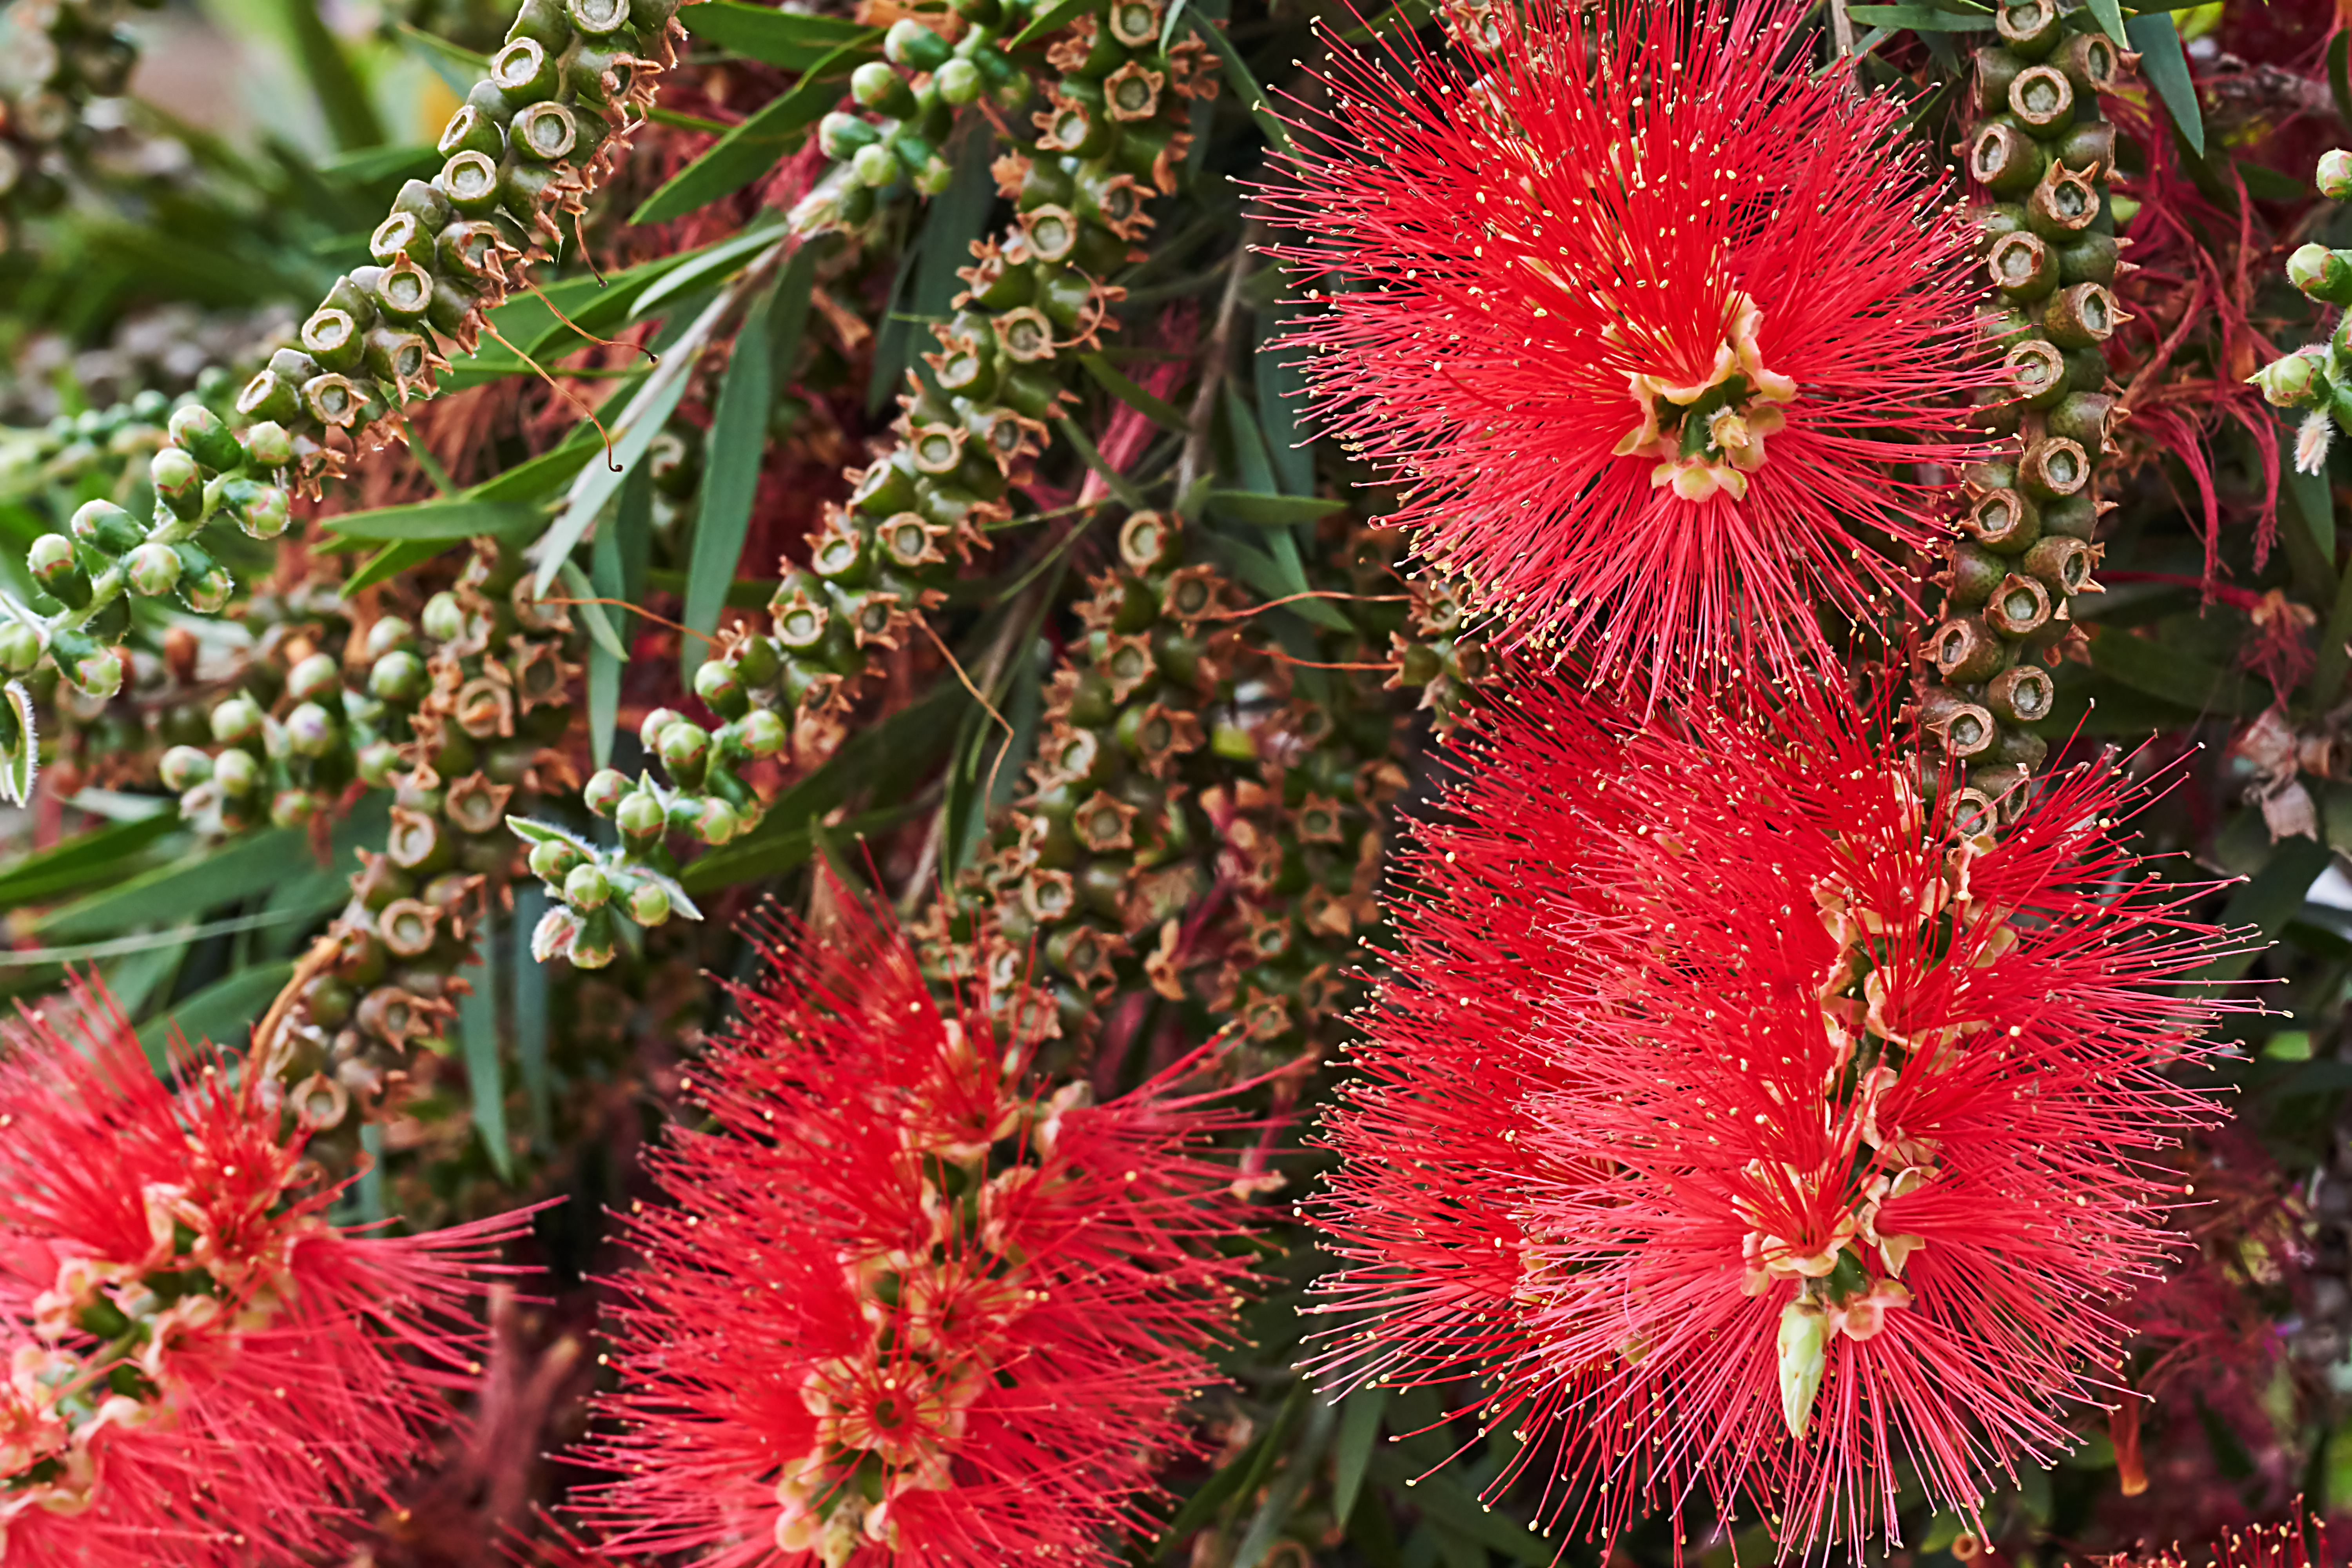 Life Cycle of the Bottle Brush Plant